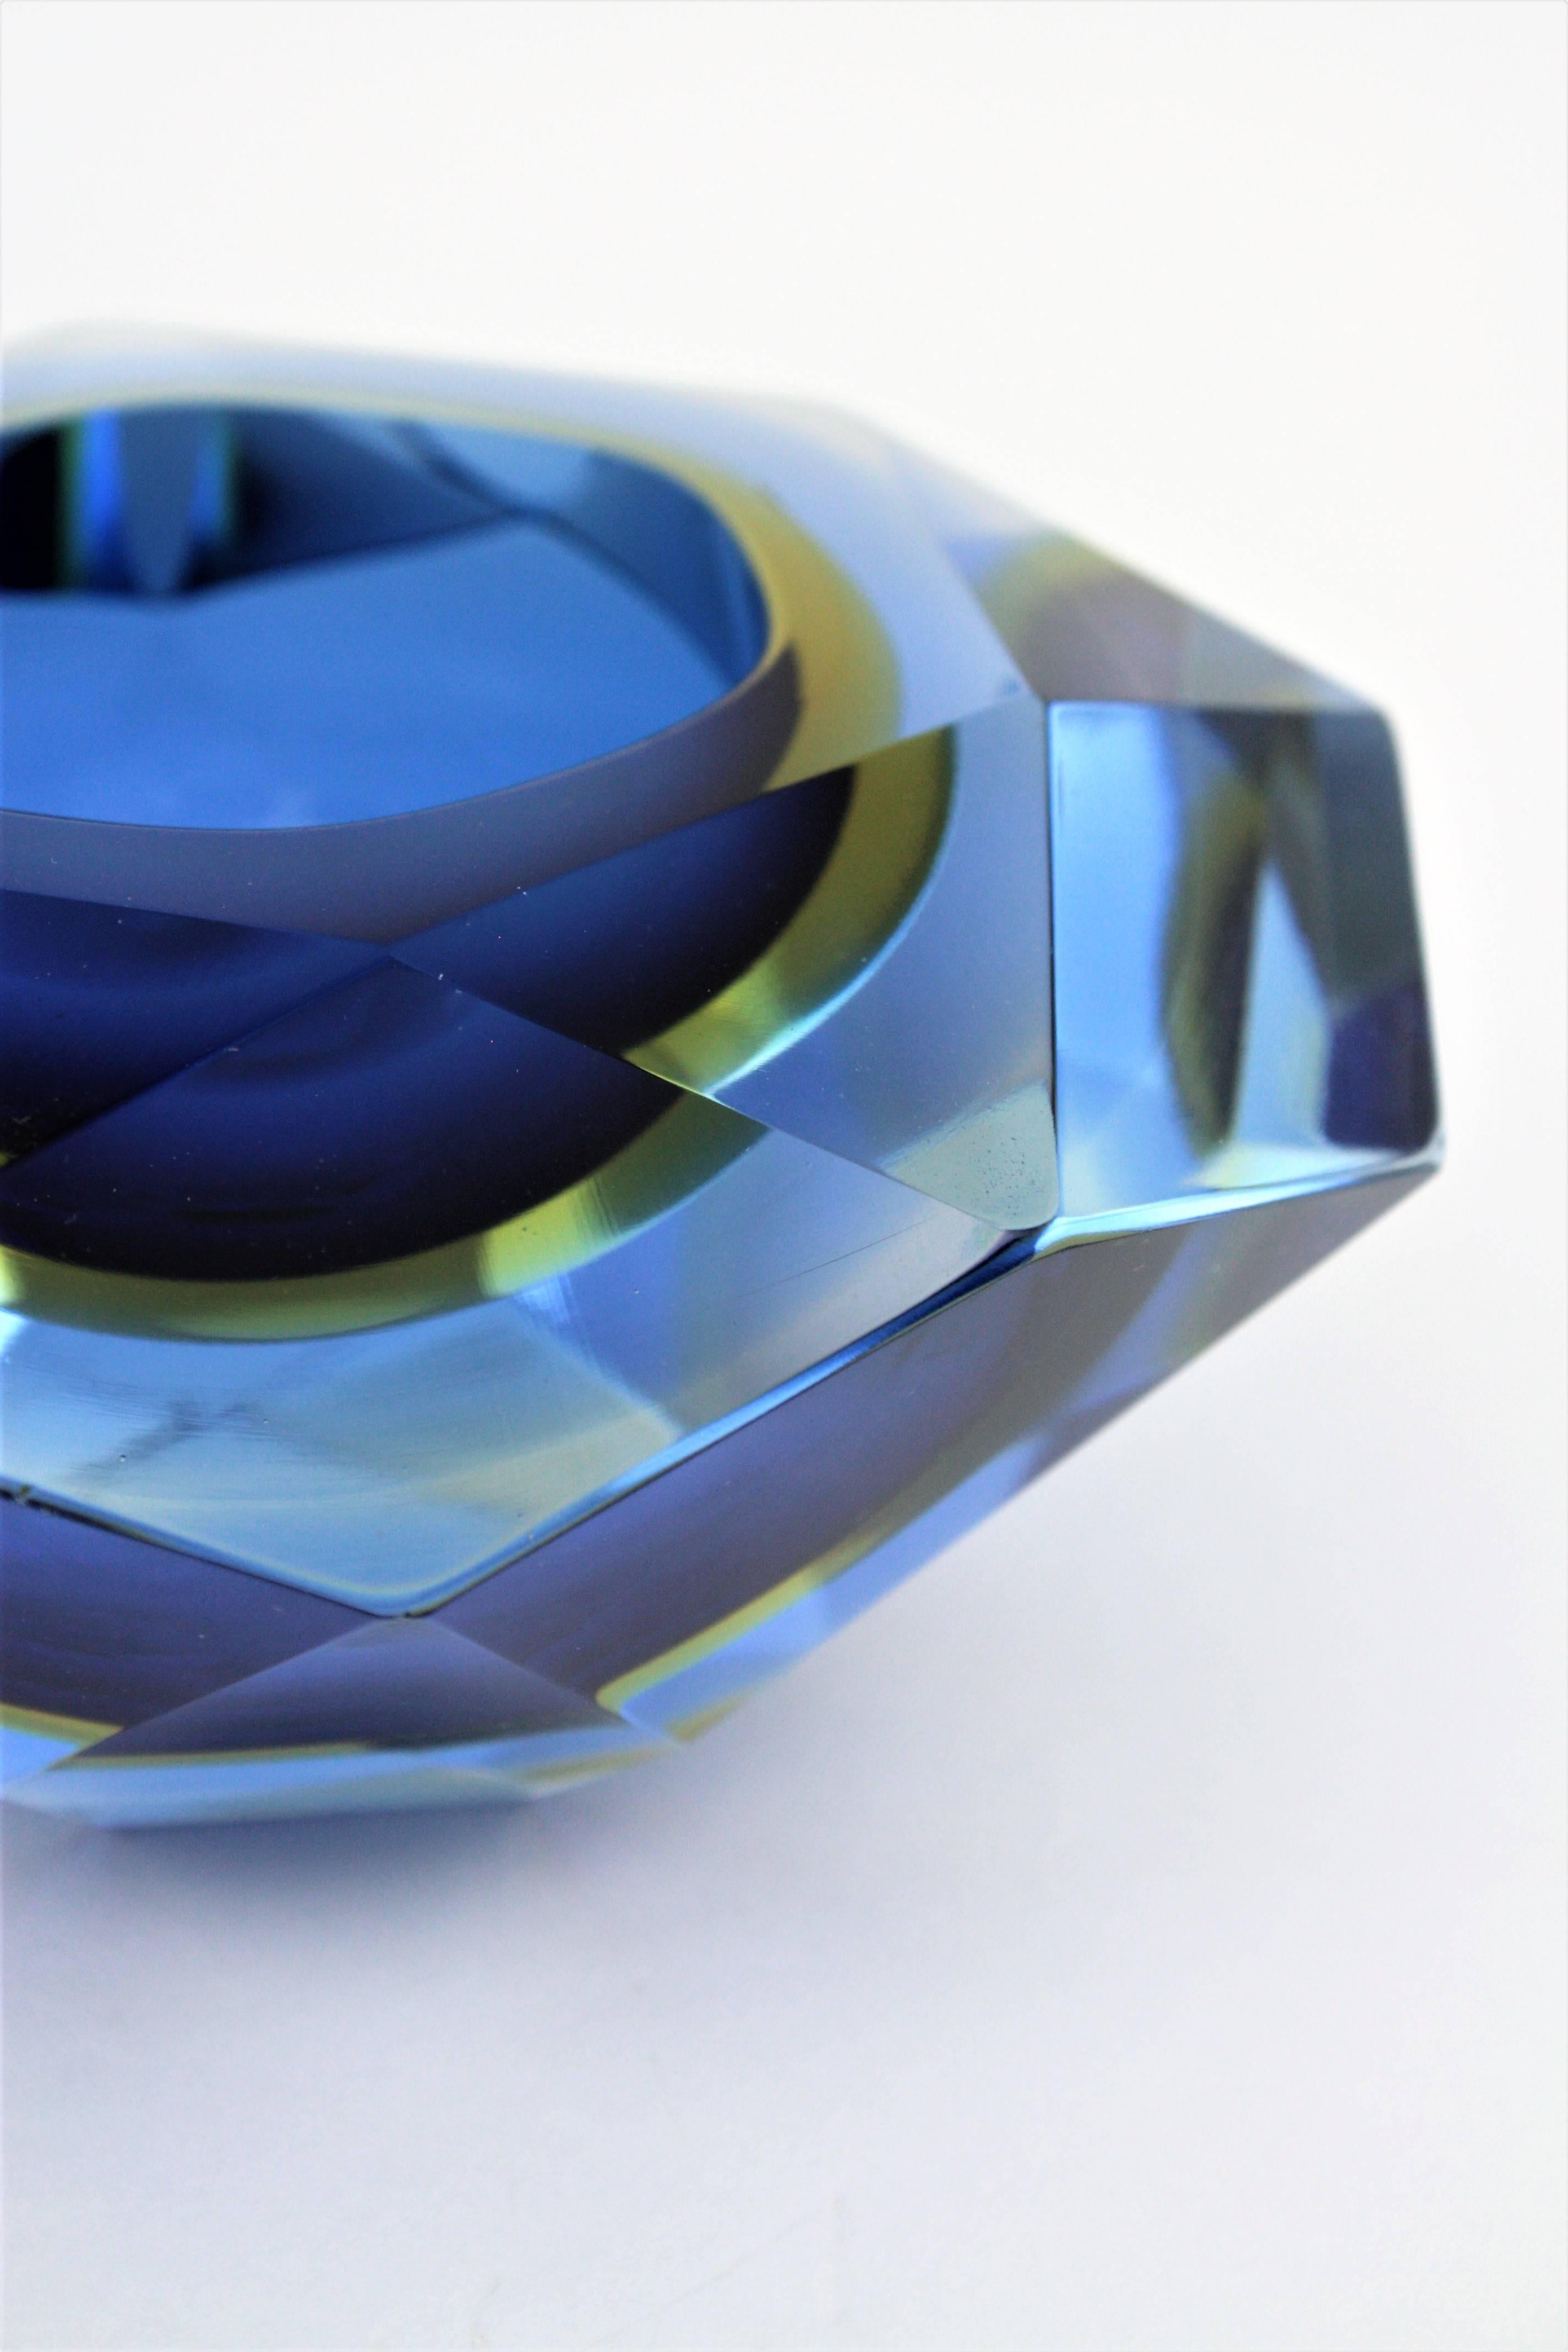 20th Century Flavio Poli Murano Cobalt Blue and Yellow Sommerso Faceted Giant Art Glass Bowl